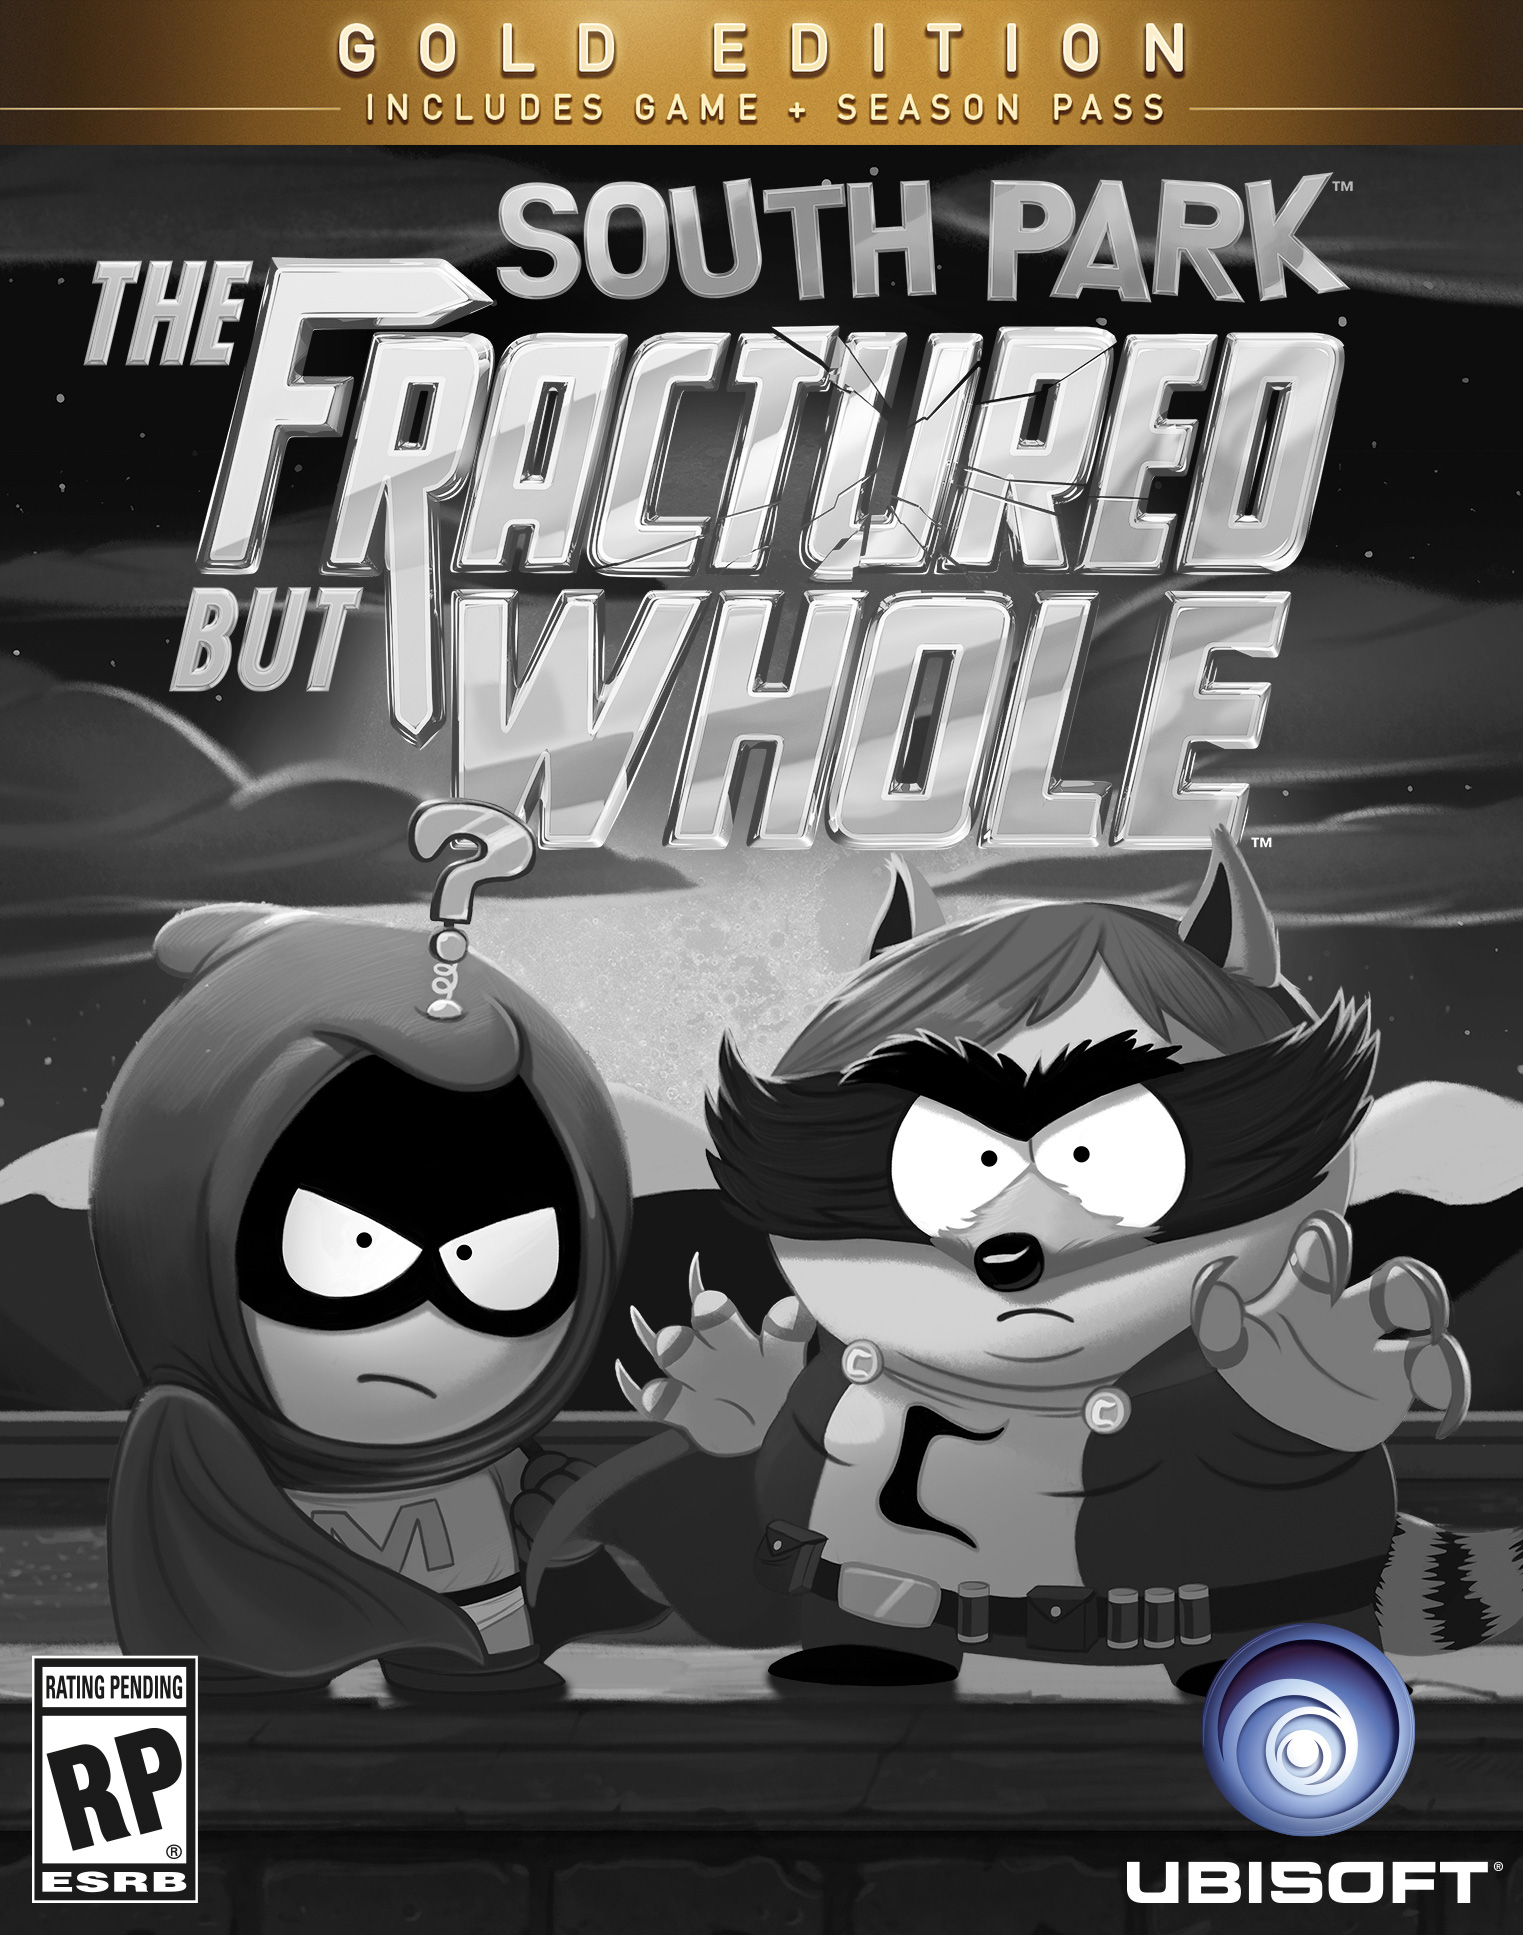 South park the fractured but whole купить ключ стим фото 13